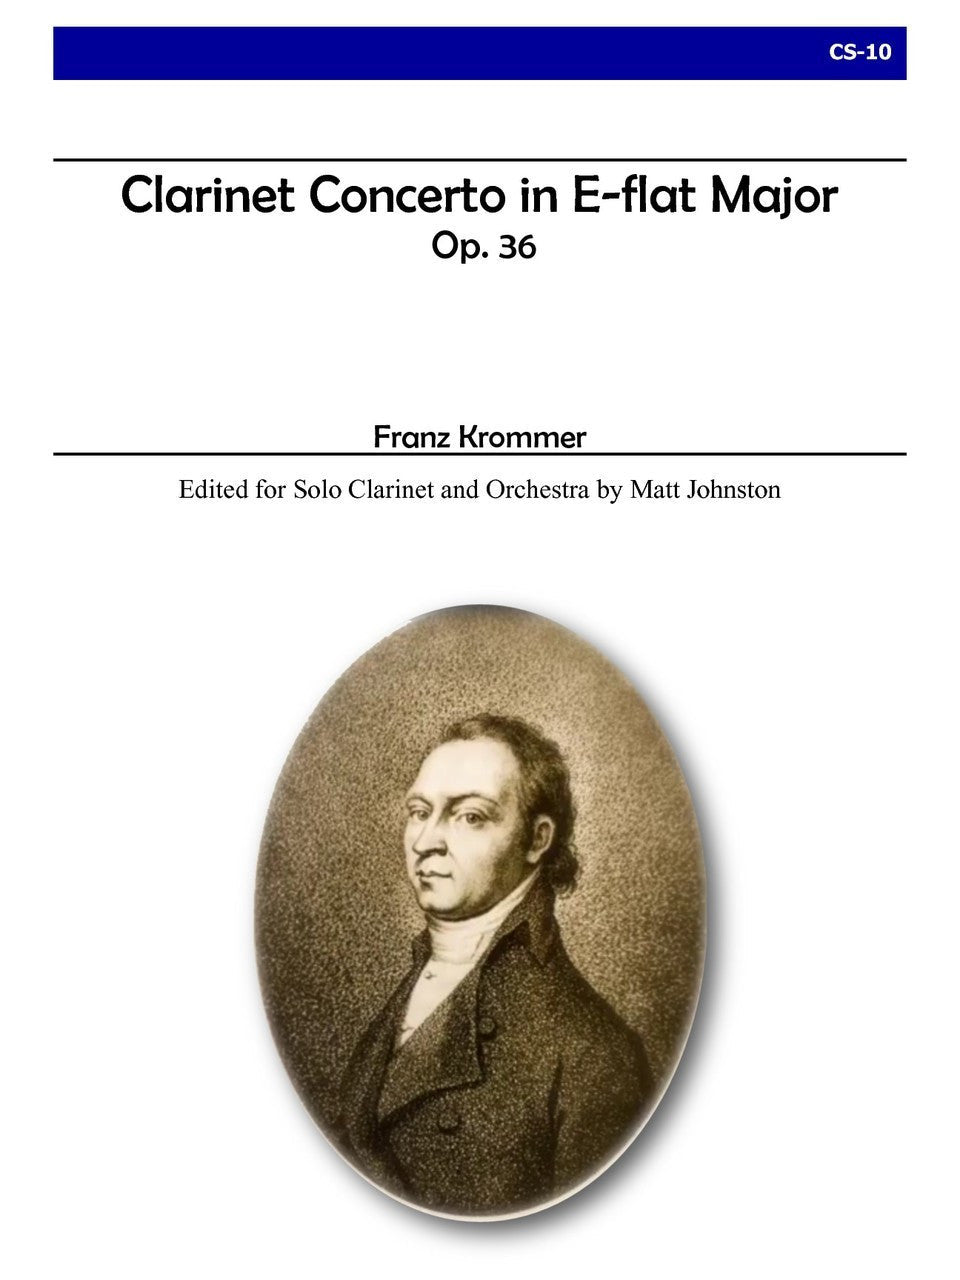 Krommer - Clarinet Concerto in E-flat Major, Op. 36 (Solo Only)